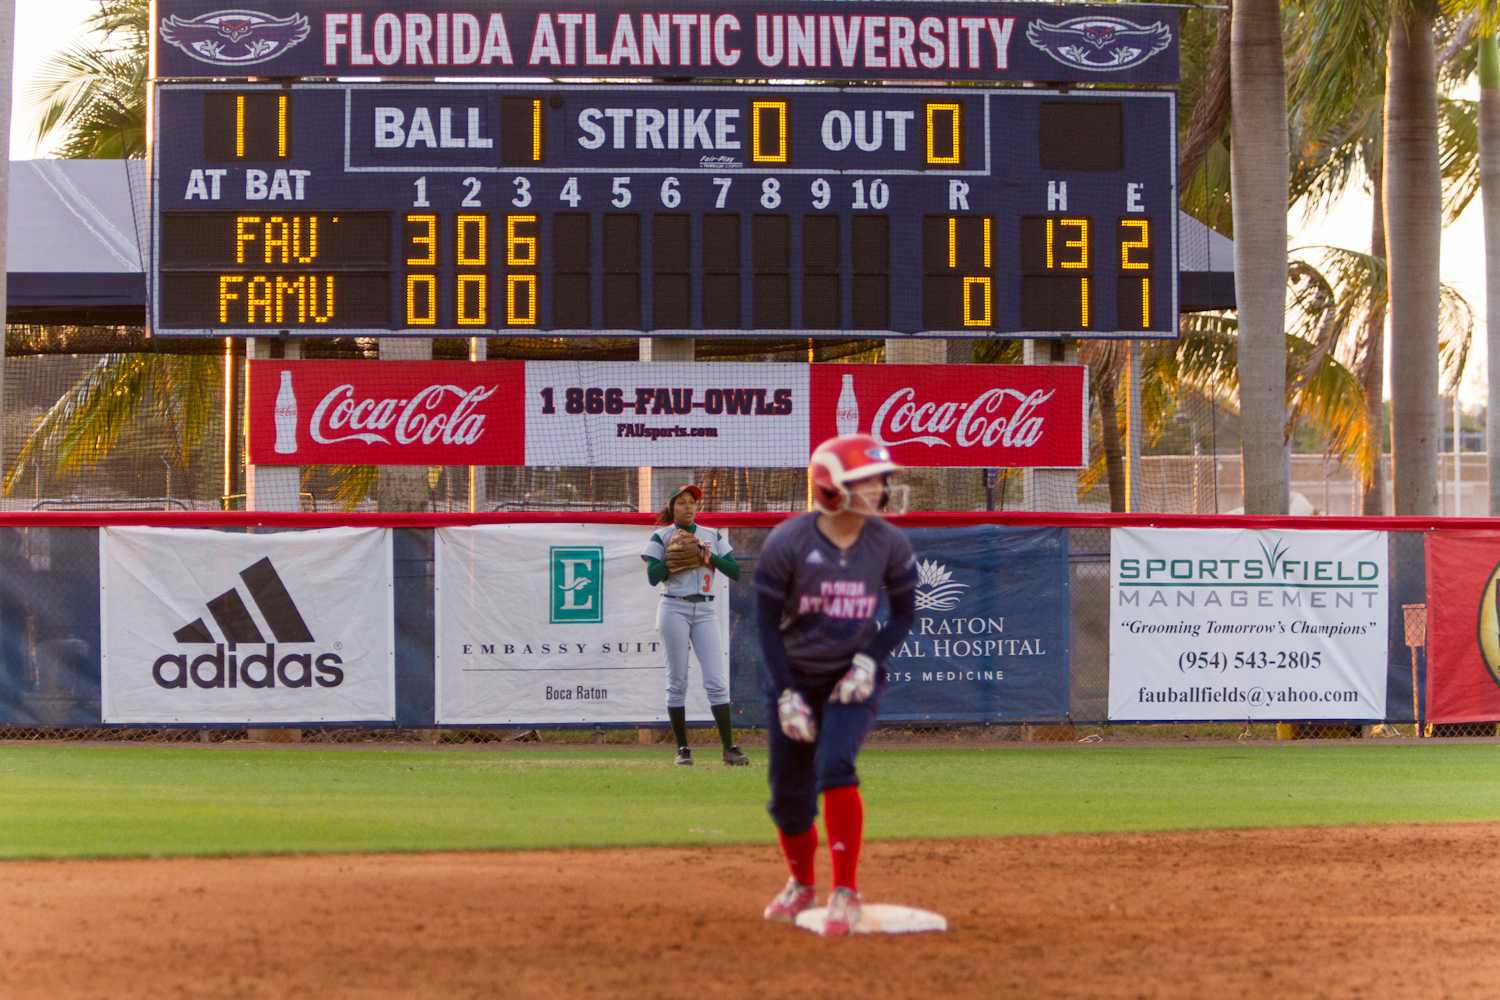 Senior outfielder Lindsey Shell (10) prepares to take a lead during the third inning. Shell earned four of the Owls’ 19 runs.